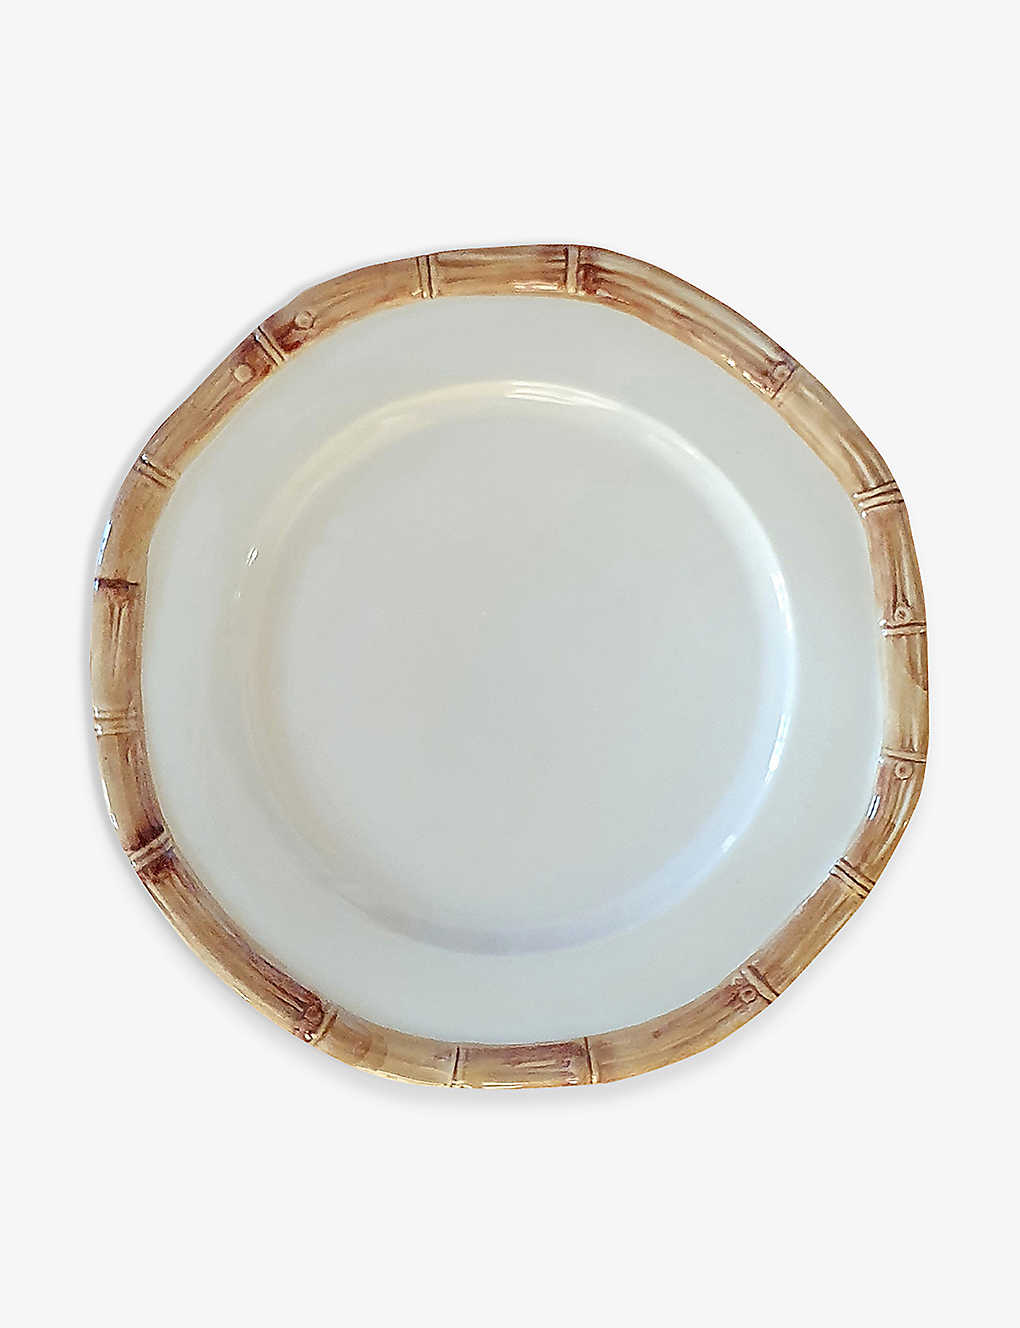 Les Ottomans Beige Bamboo Hand-painted Ceramic Charger Plate 32cm